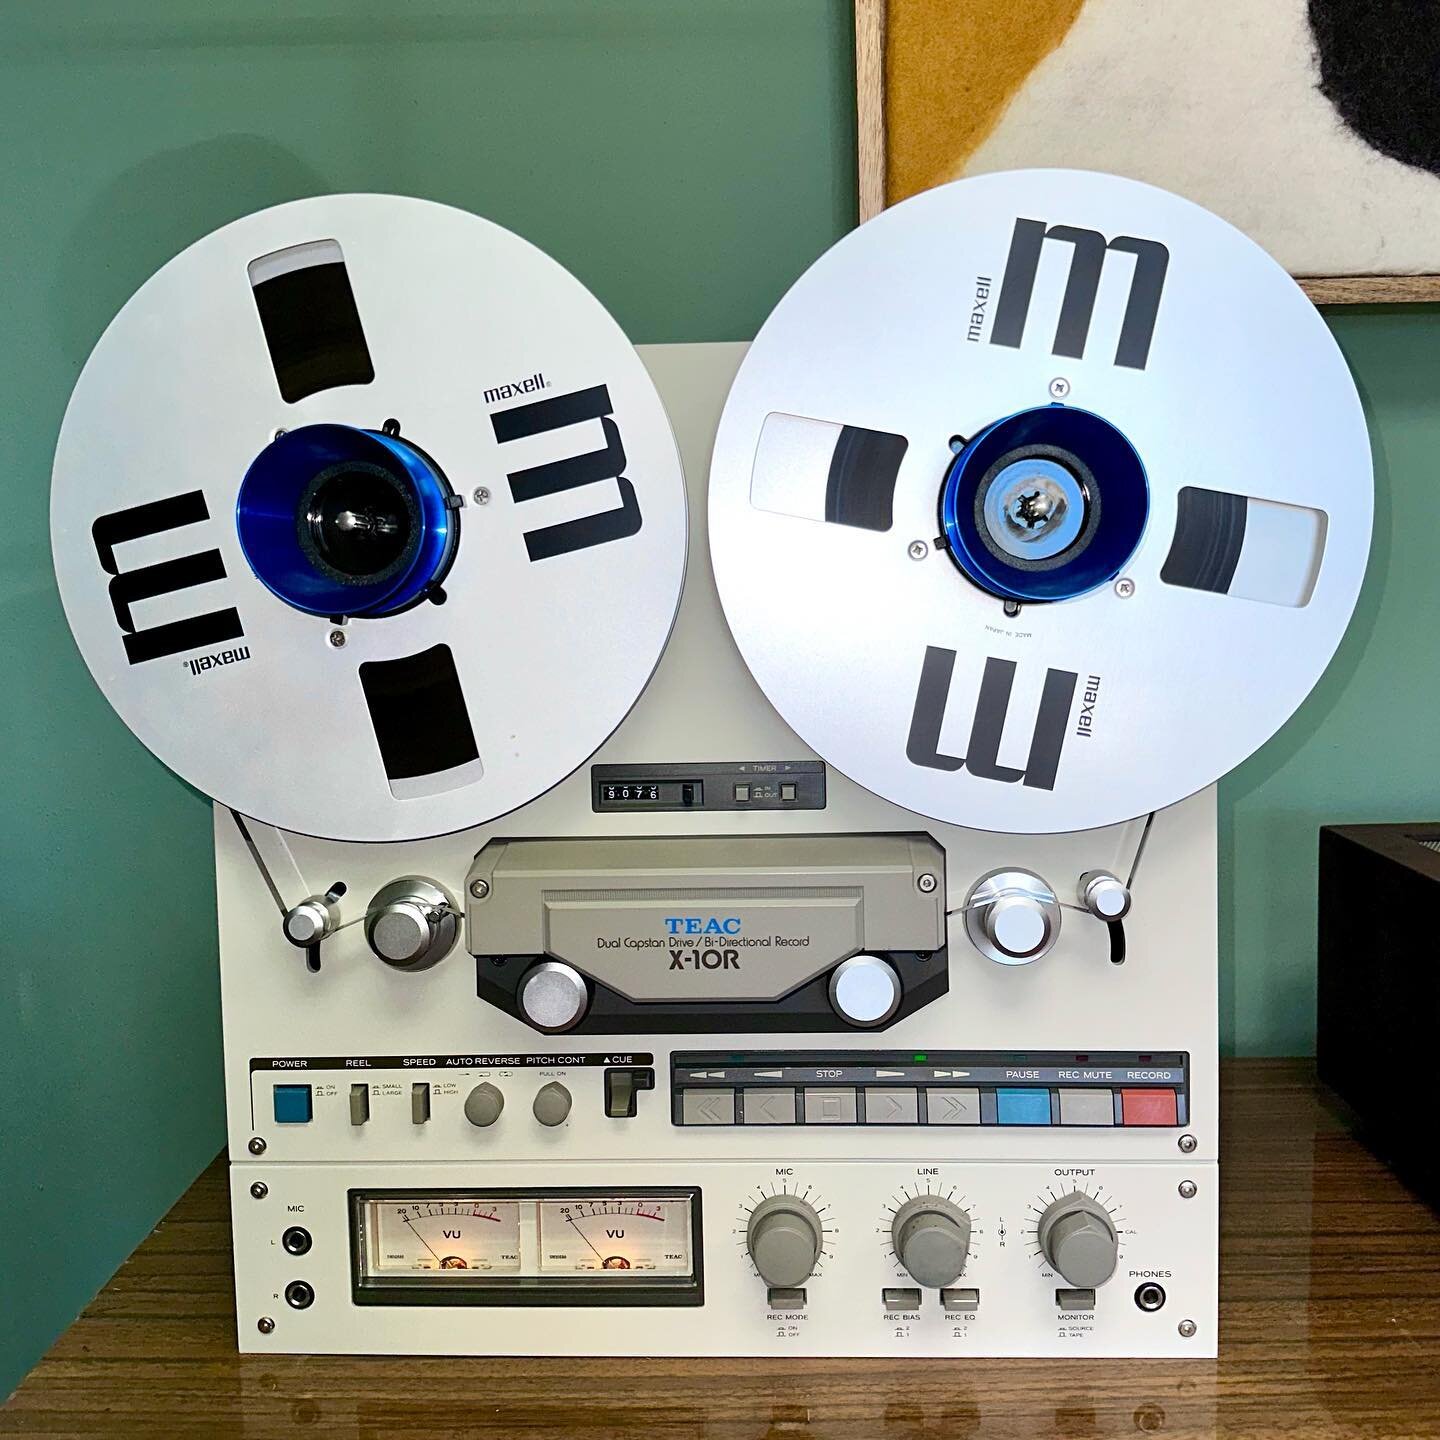 [AVAILABLE] The Teac X-10R may just be the &ldquo;Goldilocks&rdquo; of reel to reel decks. It has many advanced features of higher end decks, like auto-reverse, bias selection, dual capstans, and of course the ability to use 10.5&rdquo; reels&hellip;